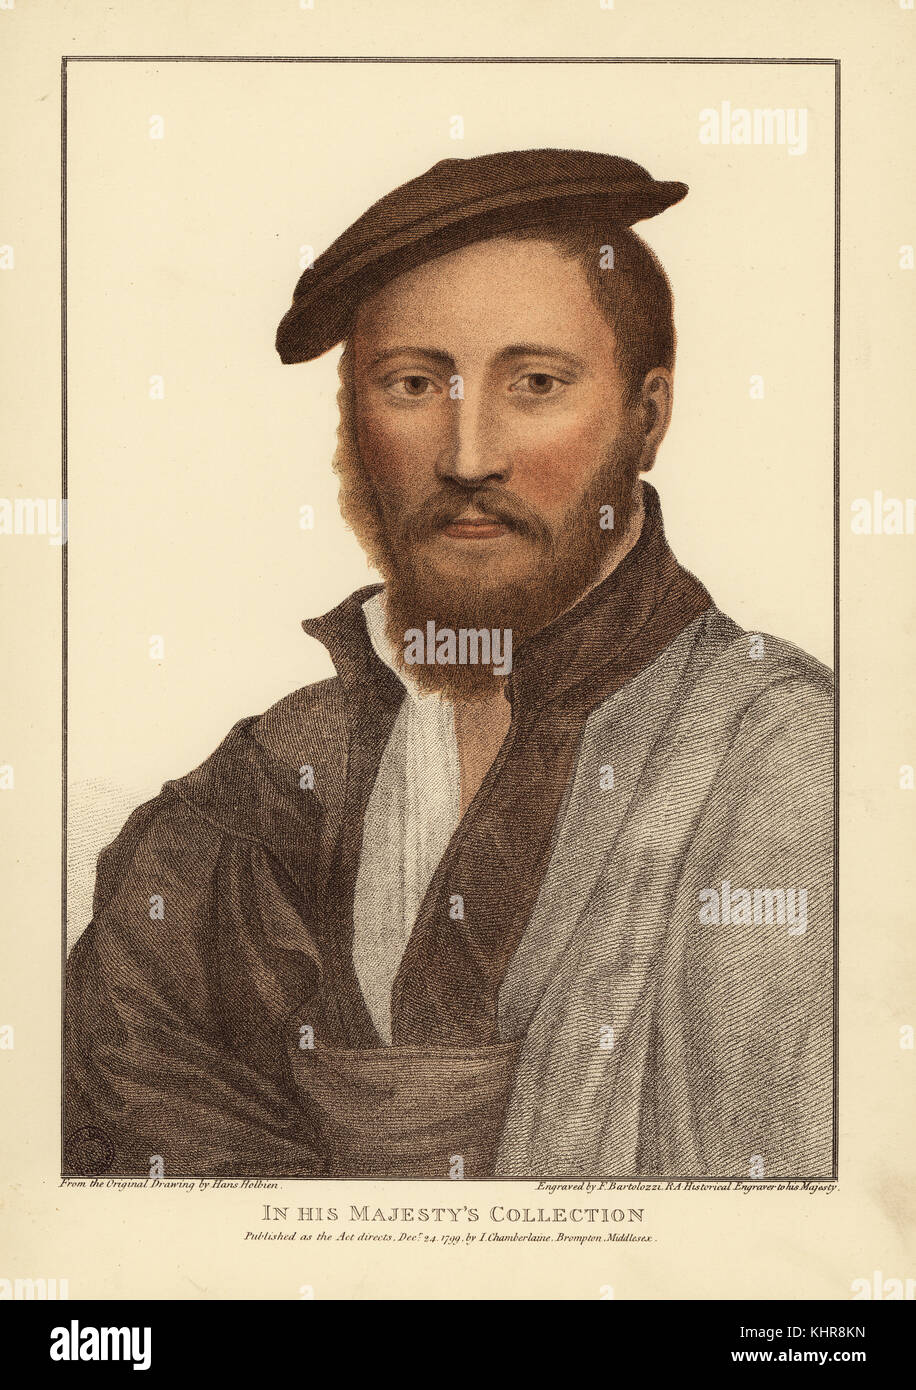 Unidentified man, possibly John Dudley, 1st Duke of Northumberland. Handcoloured copperplate engraving by Francis Bartolozzi after Hans Holbein from Facsimiles of Original Drawings by Hans Holbein, Hamilton, Adams, London, 1884. Stock Photo